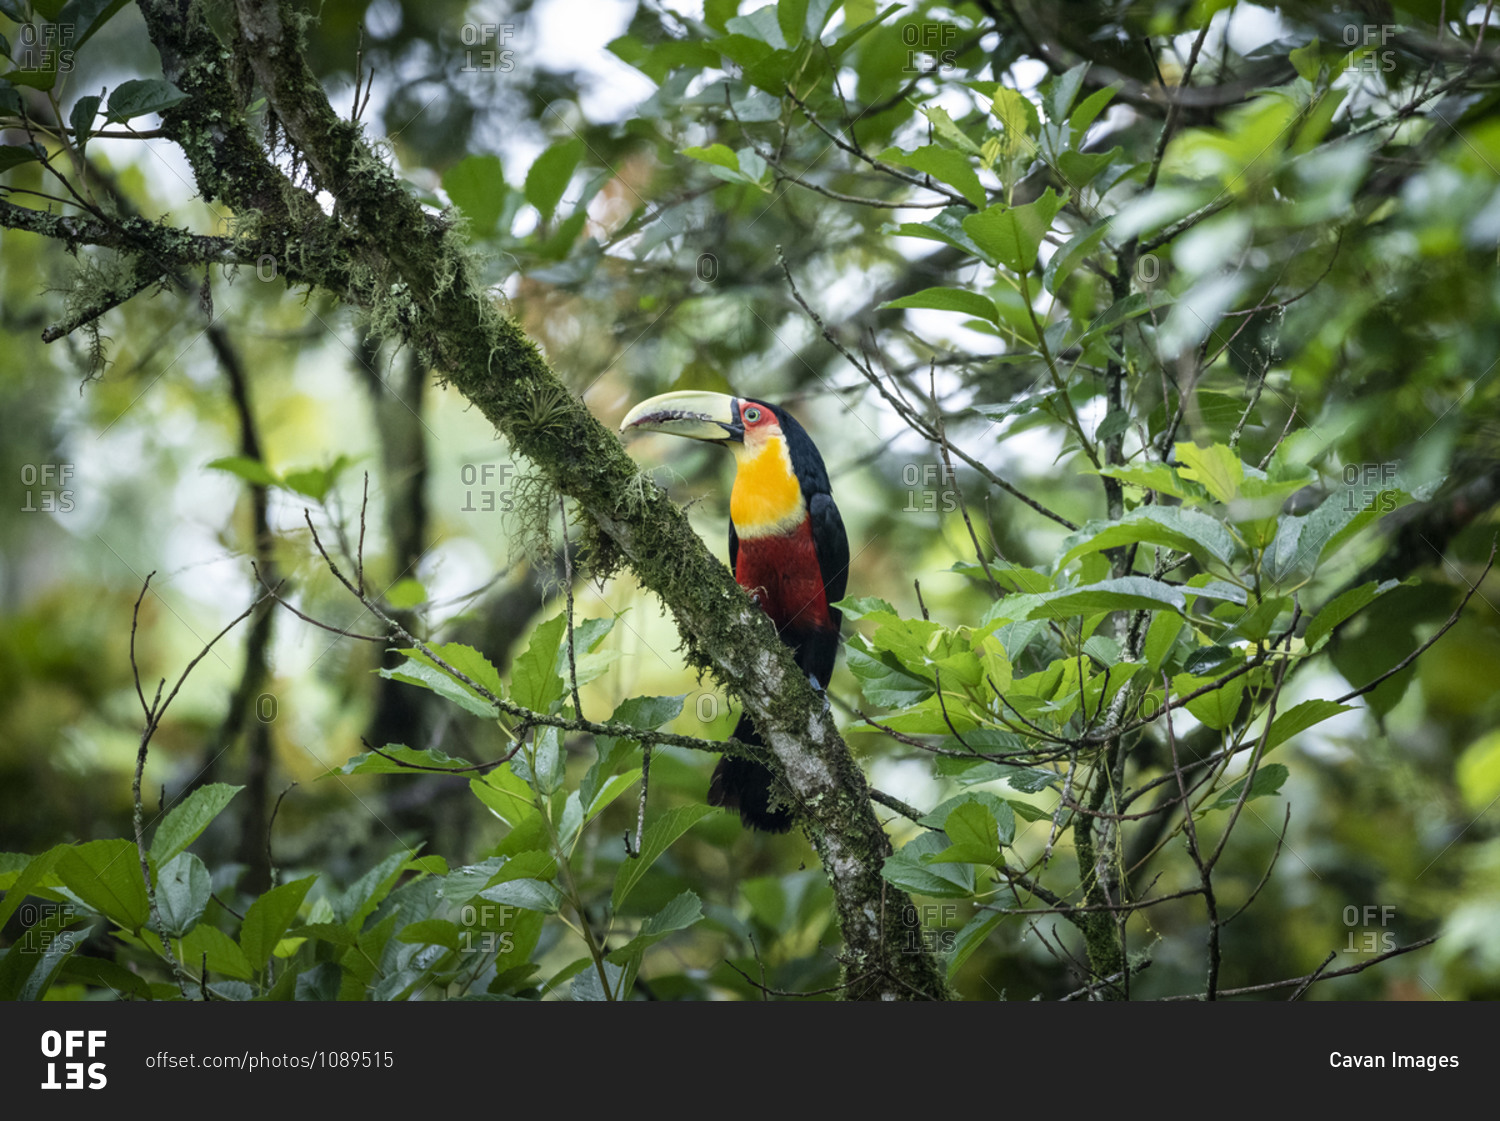 Beautiful colorful tropical toucan on tree branch in green rainforest